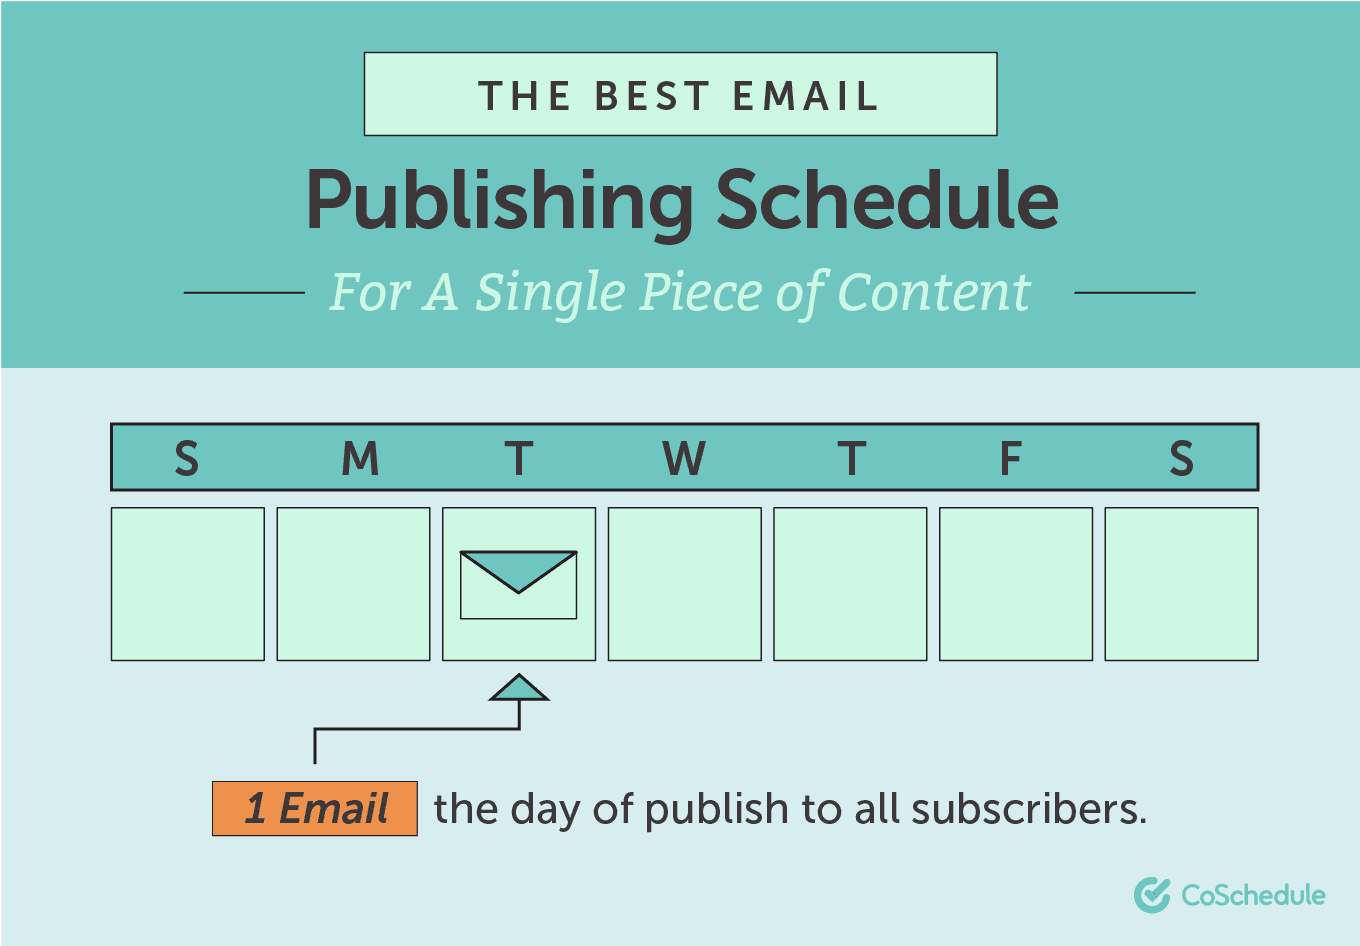 The best email publishing schedule